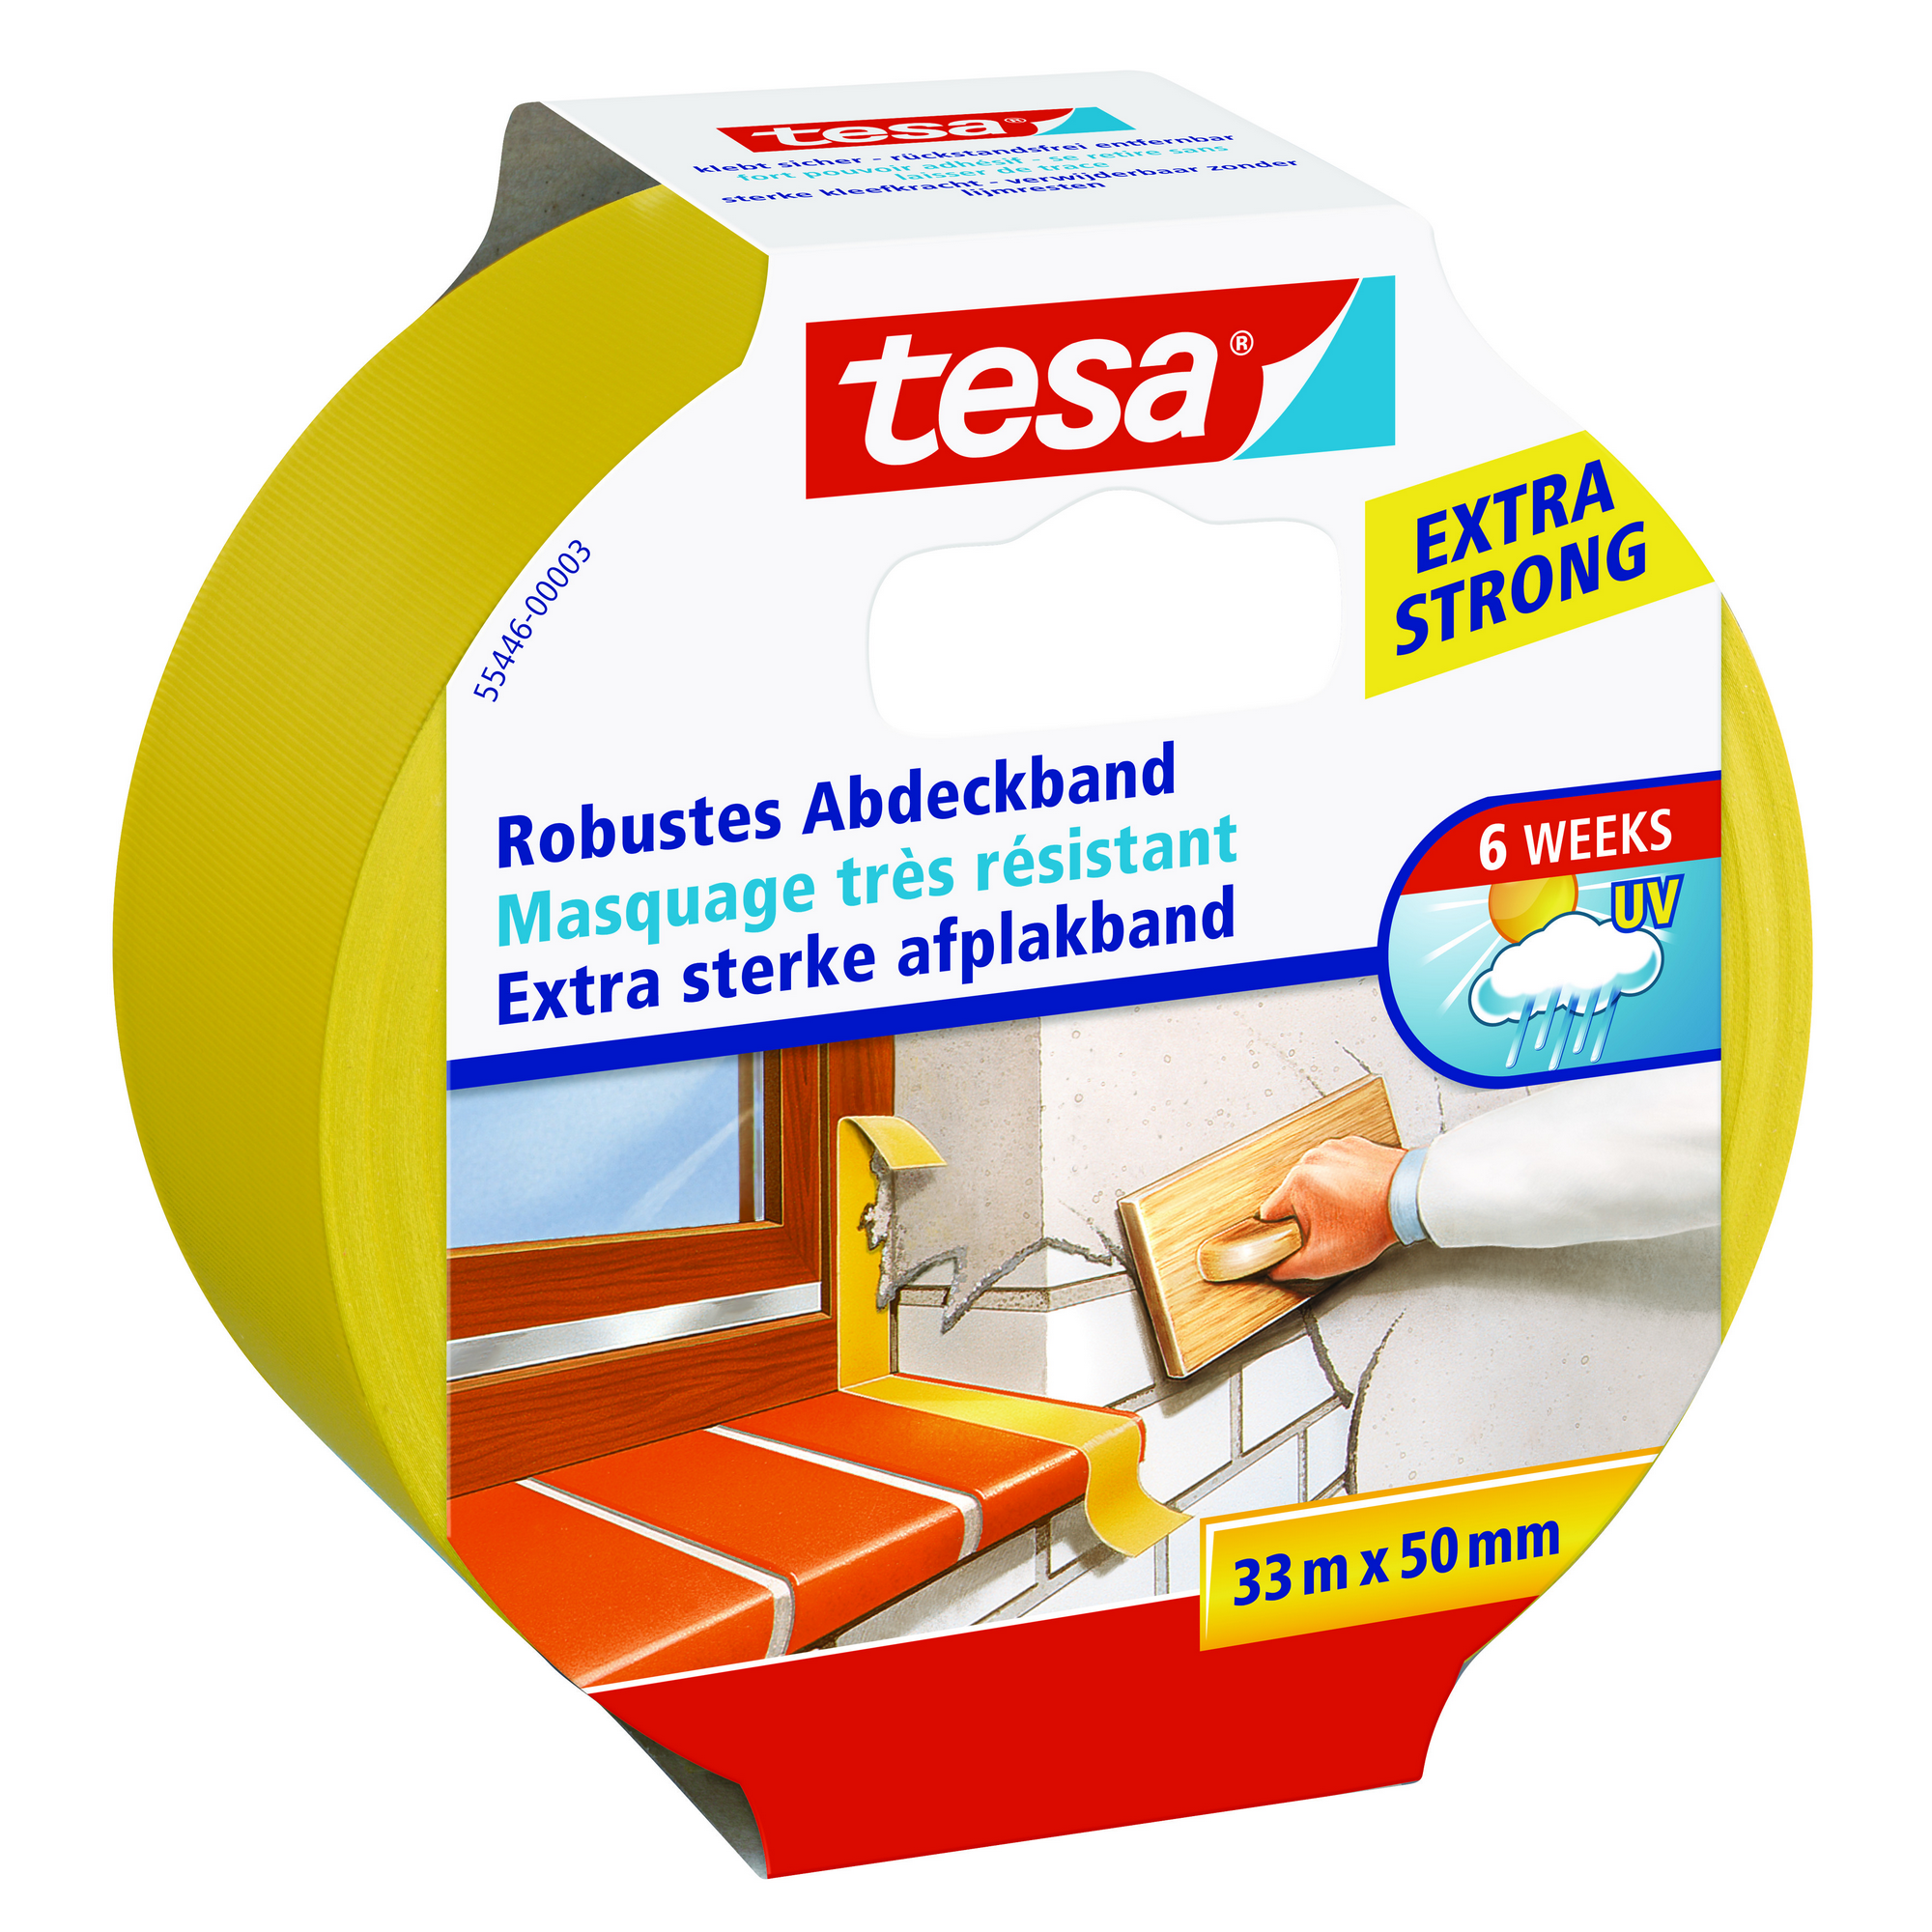 Tesa Robustes Abdeckband 33 m gelb + product picture